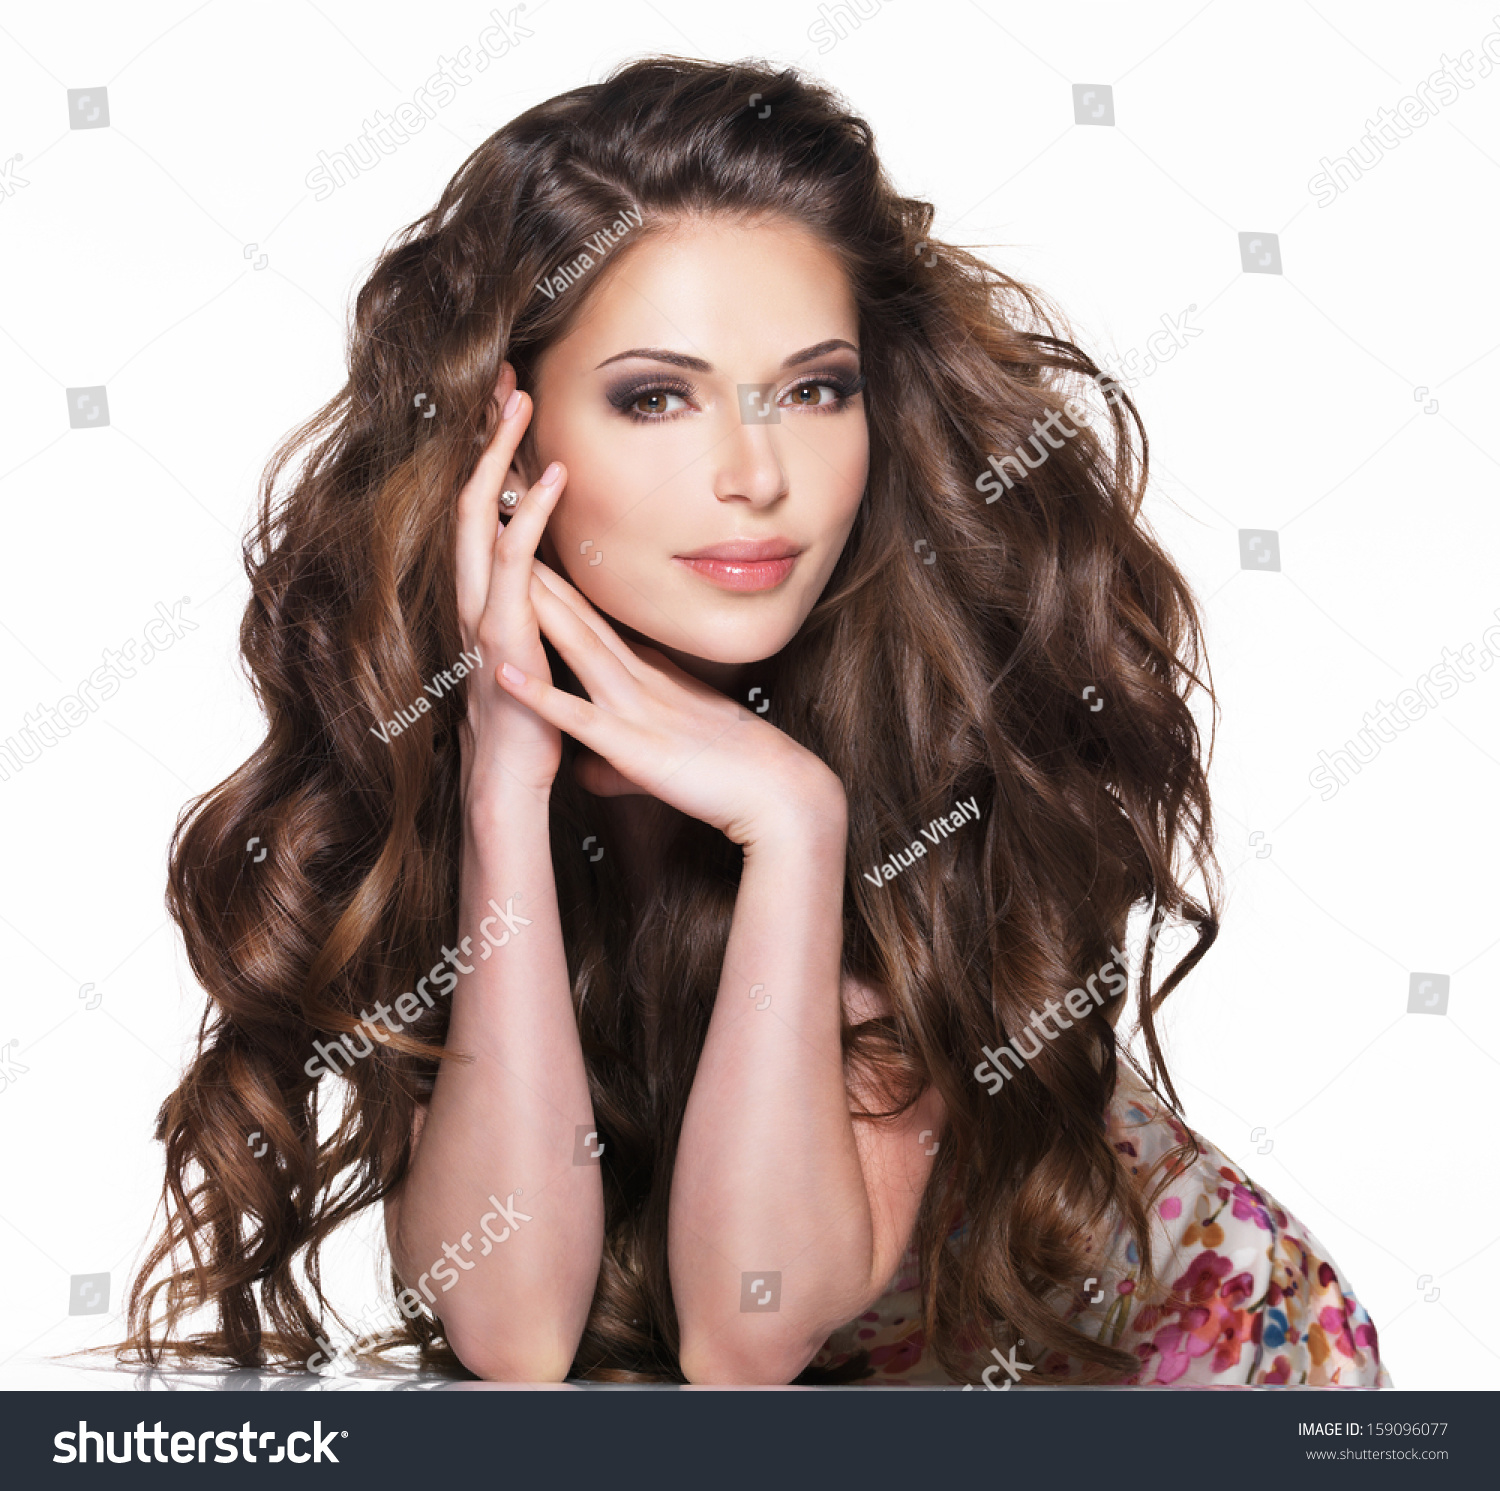 Beautiful Adult Woman With Long Brown Curly Hair Fashion Model Over White Background Stock 